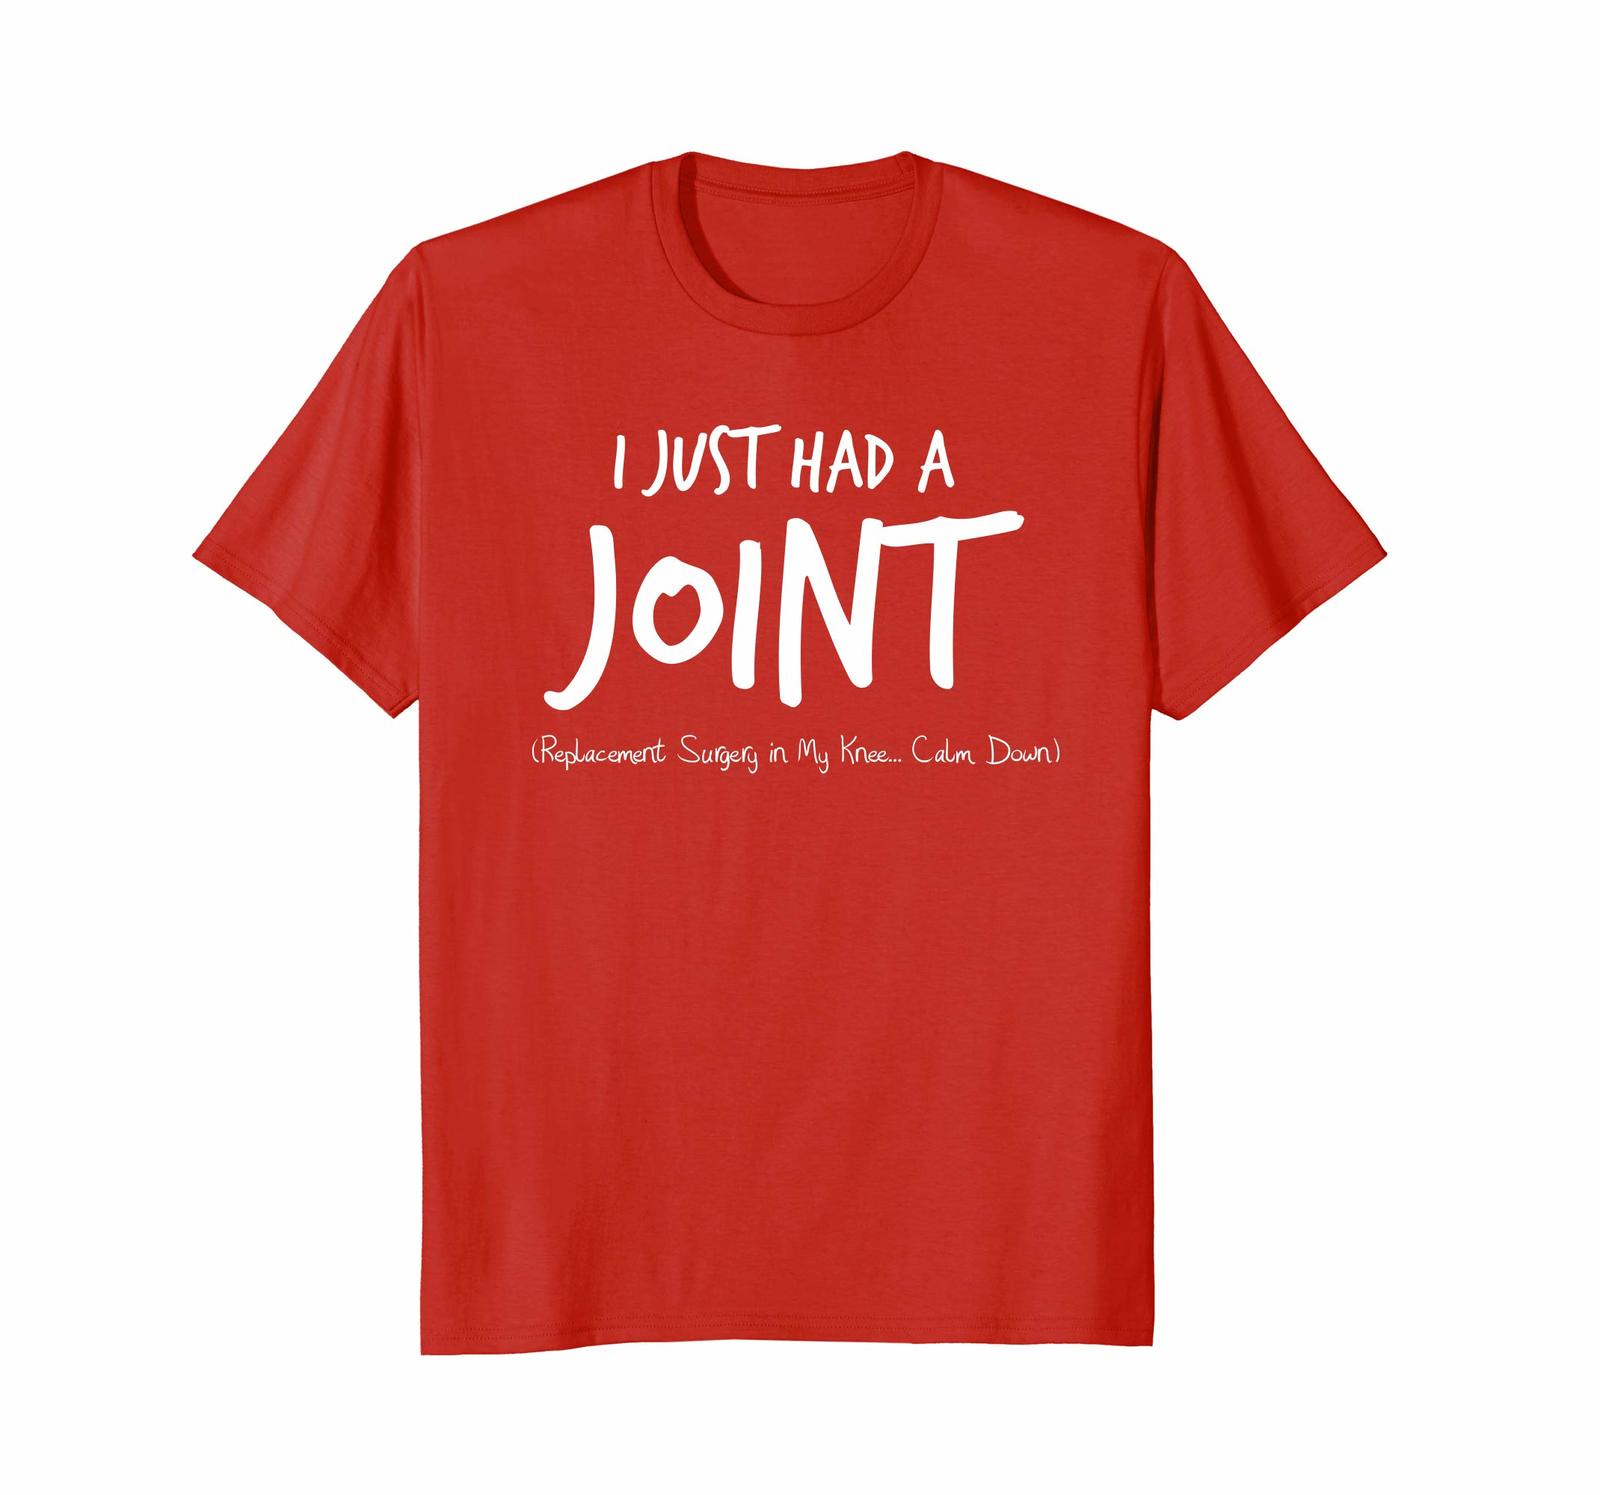 Tee Shirts I Just Had A Joint Replacement Surgery In My Knee T Shirt Men T Shirts Tank Tops 9646